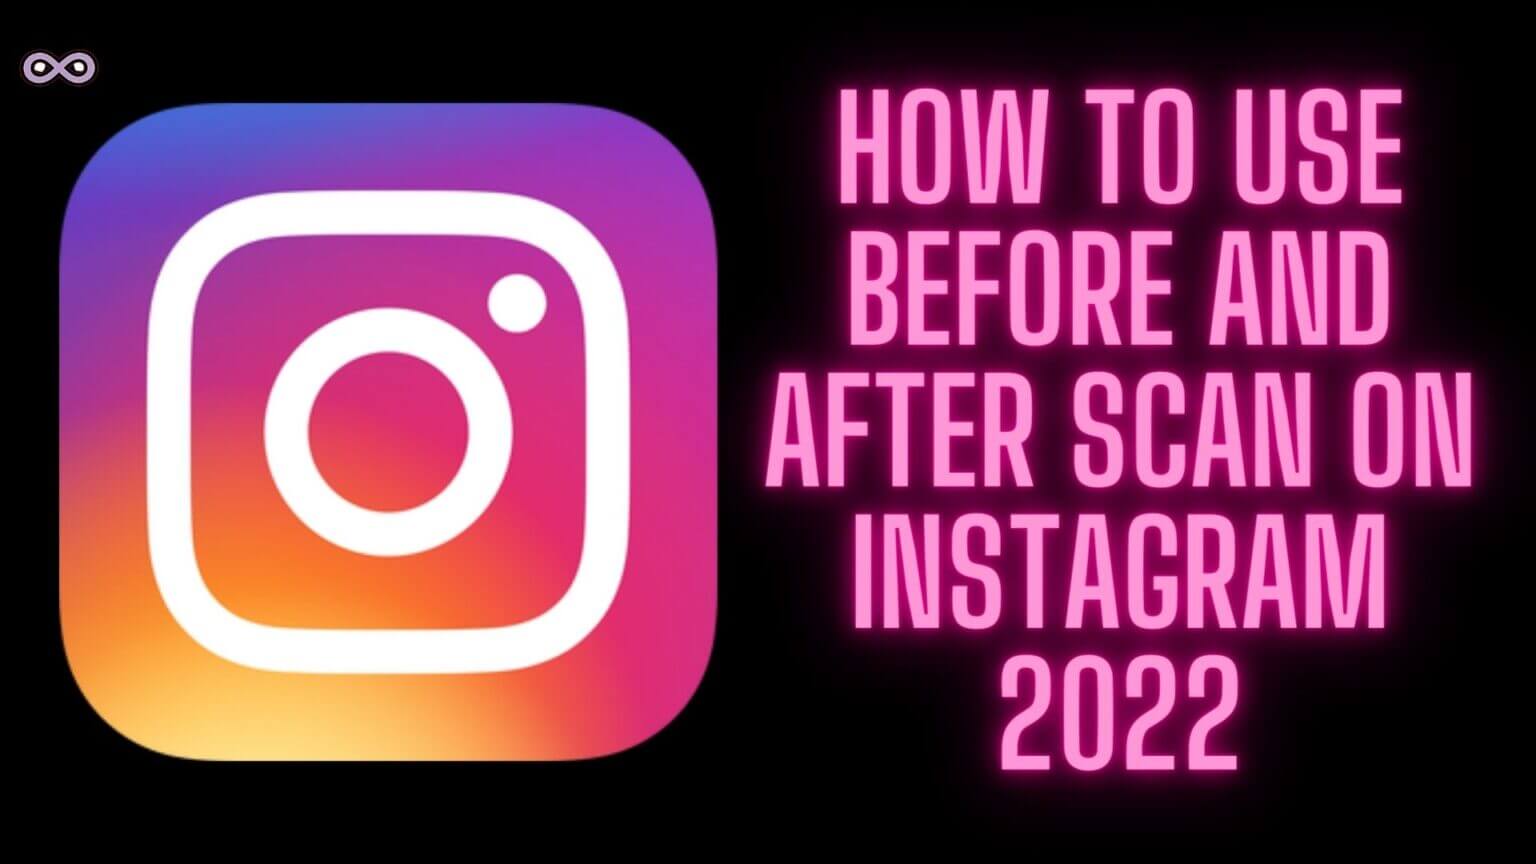 How to Use Before and After Scan on Instagram